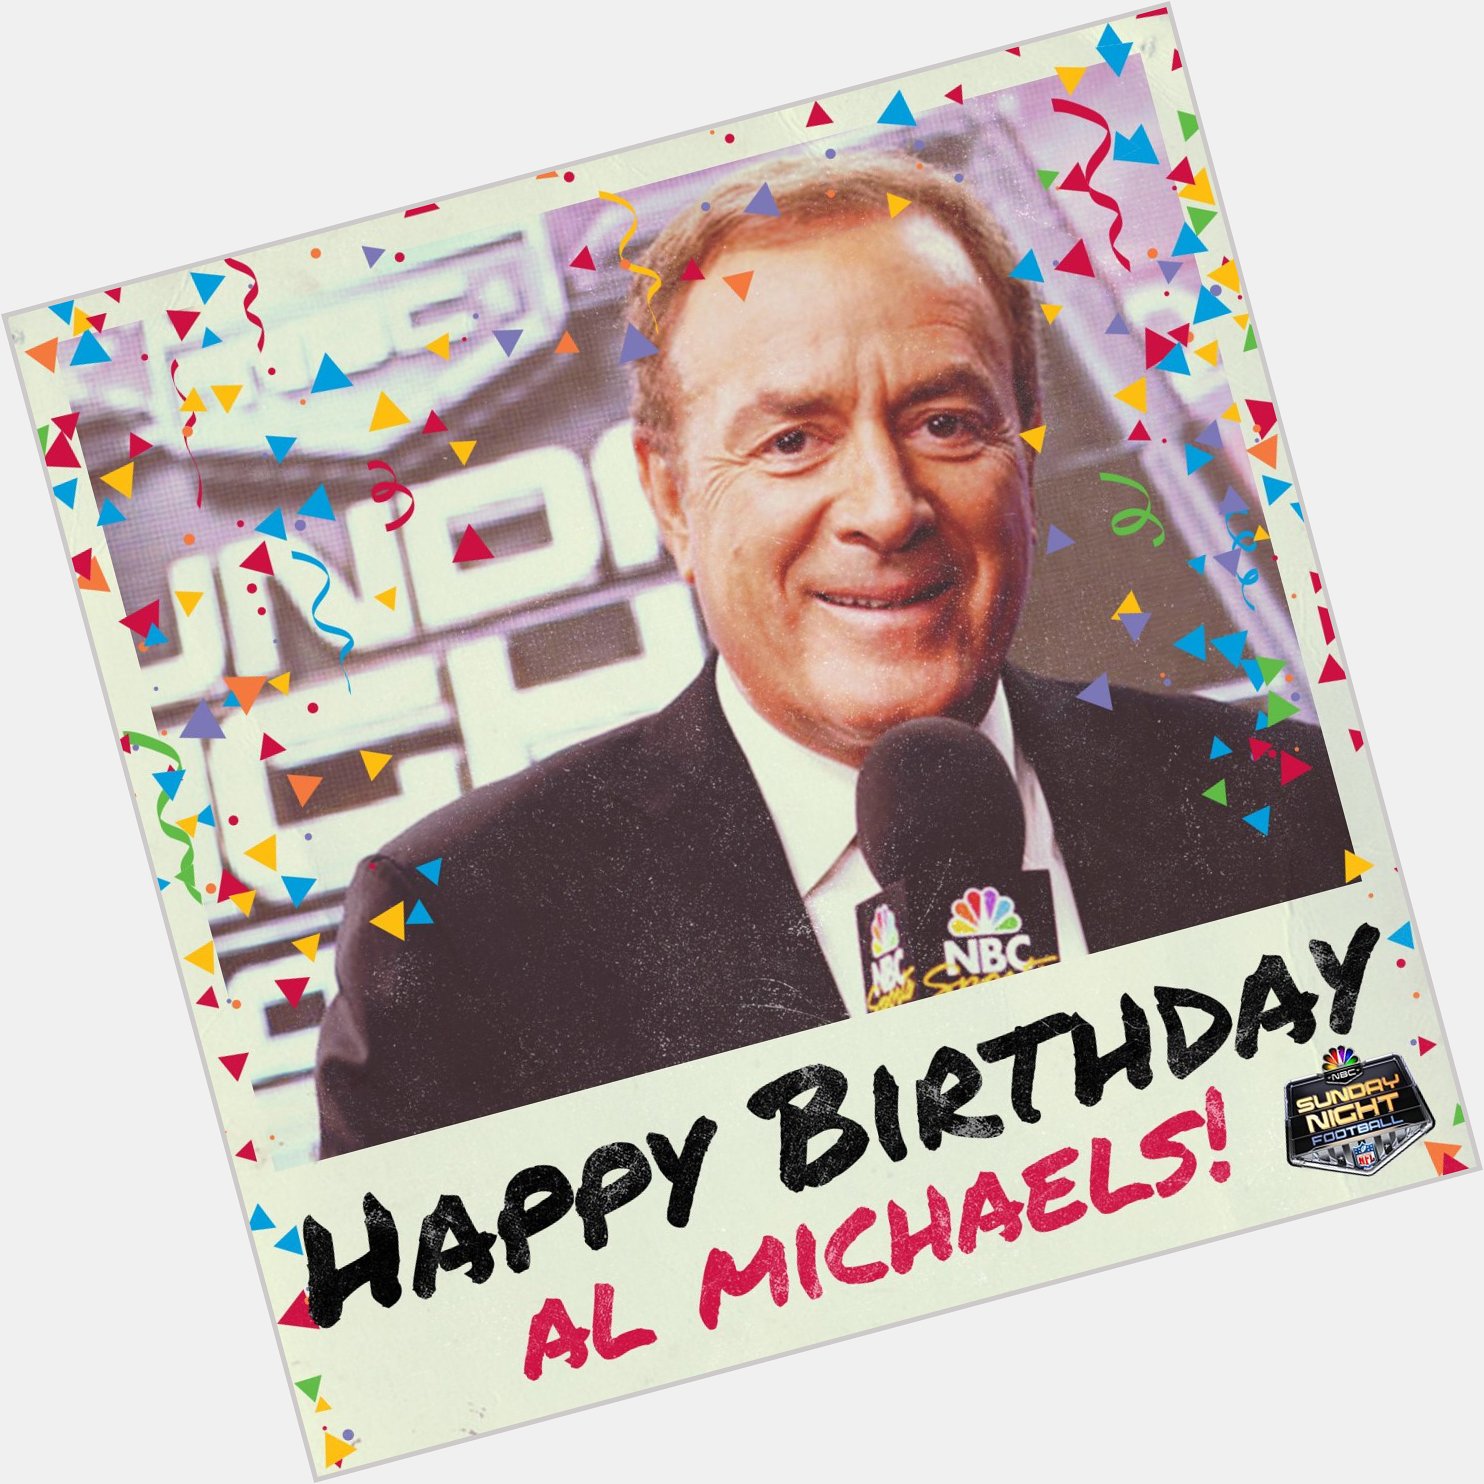 Happy birthday to our very own Al Michaels!! Join him for his birthday broadcast of on NBC right now! 